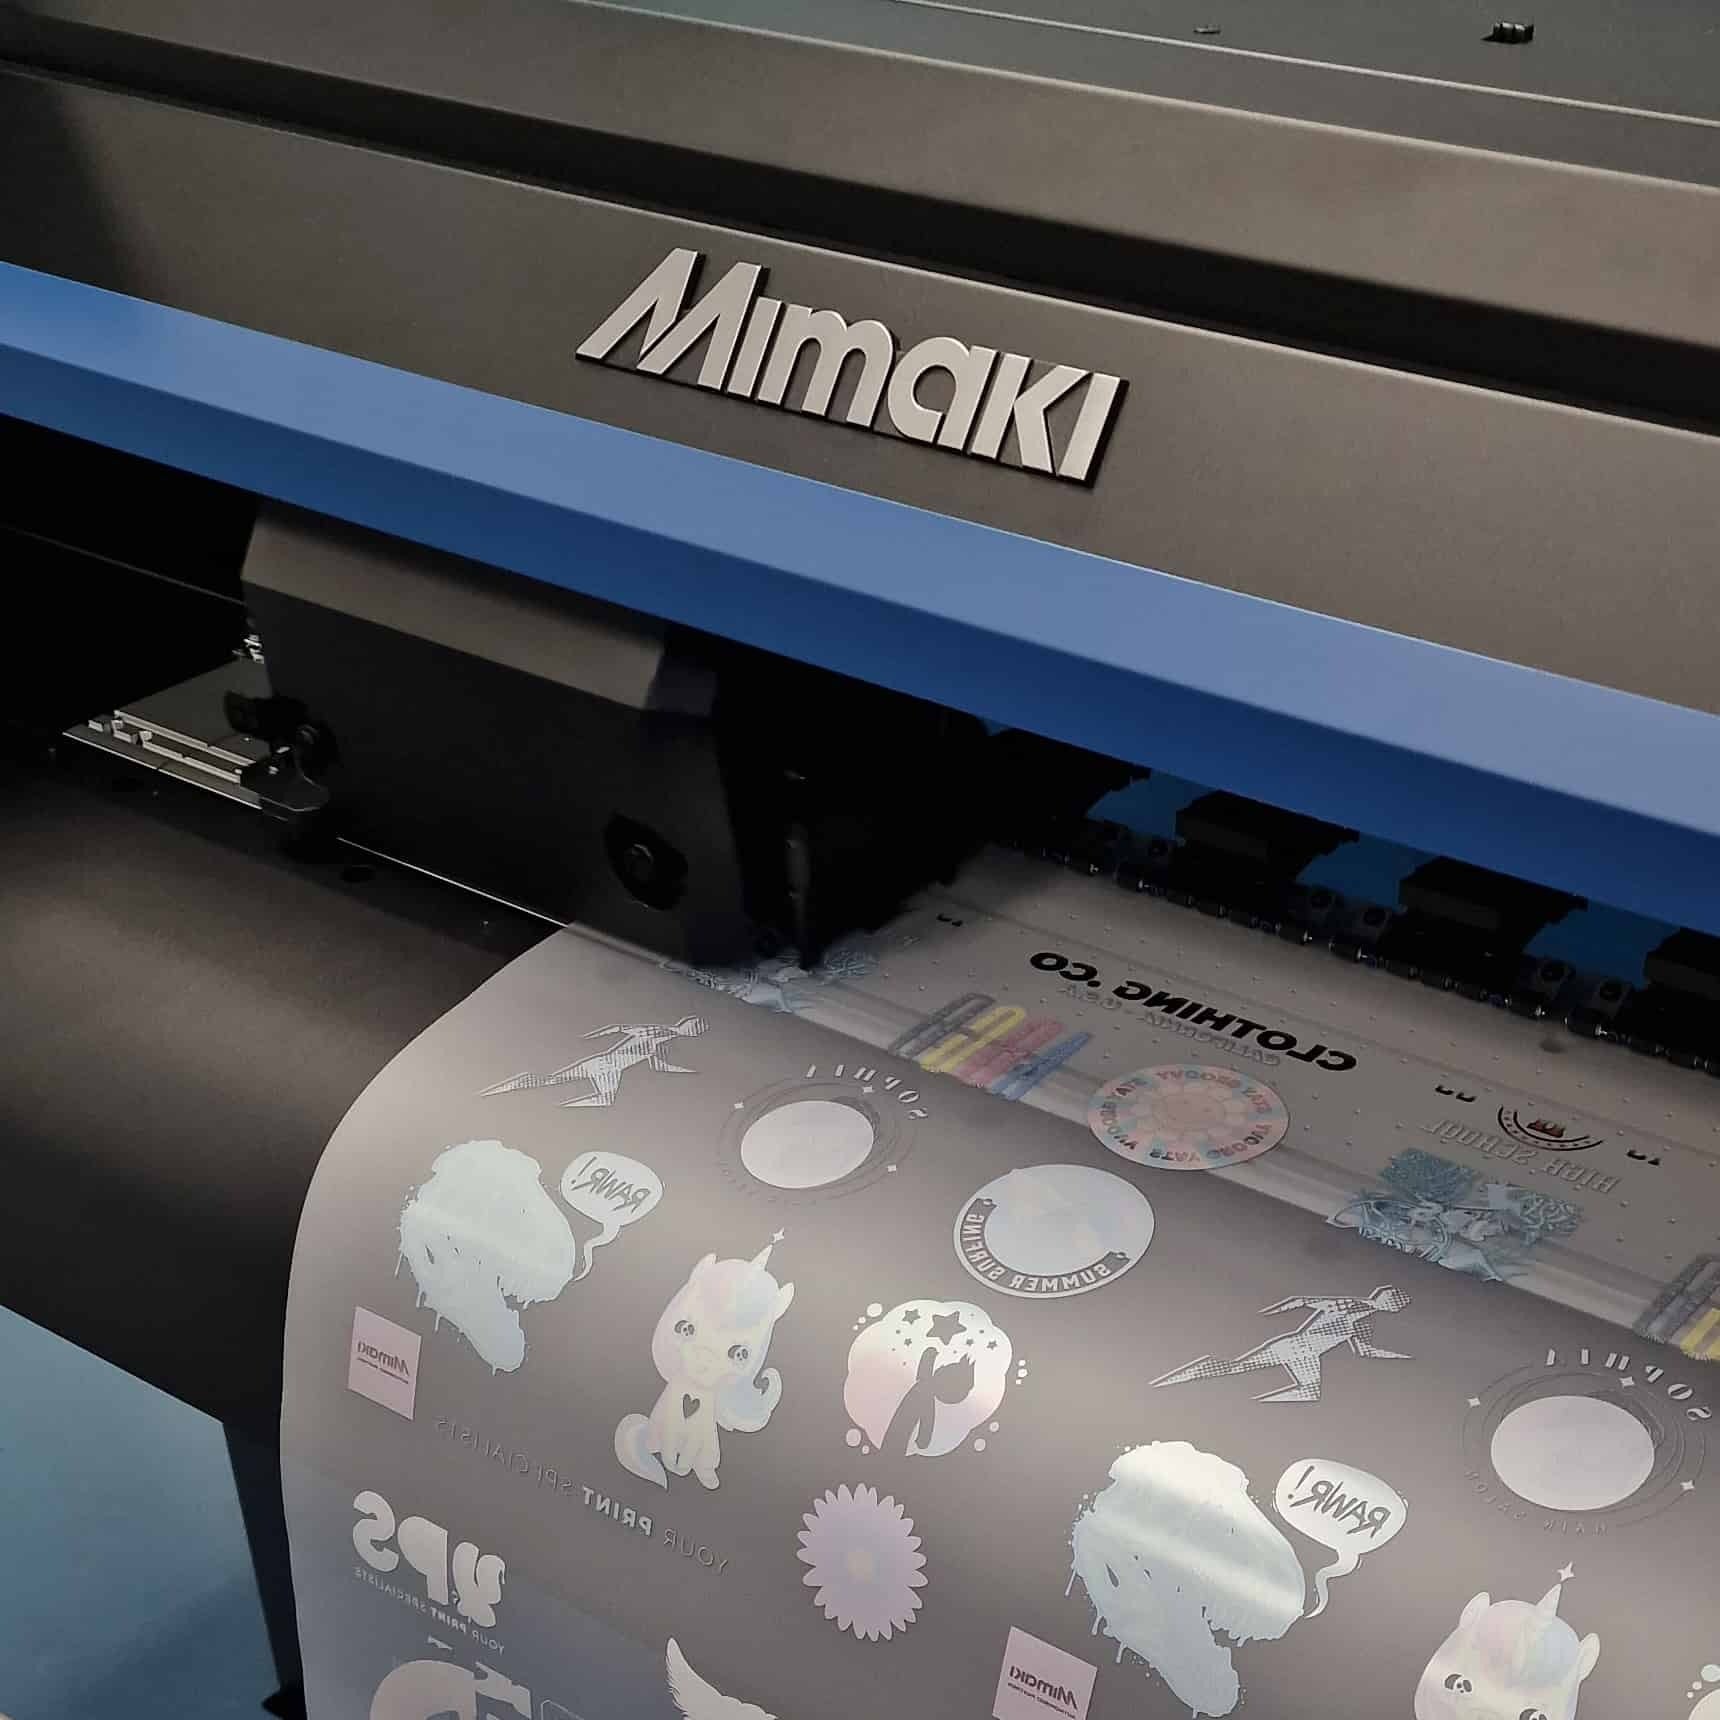 Mimaki TxF 300-75 Printer Zoomed in with Media showing bring printed on